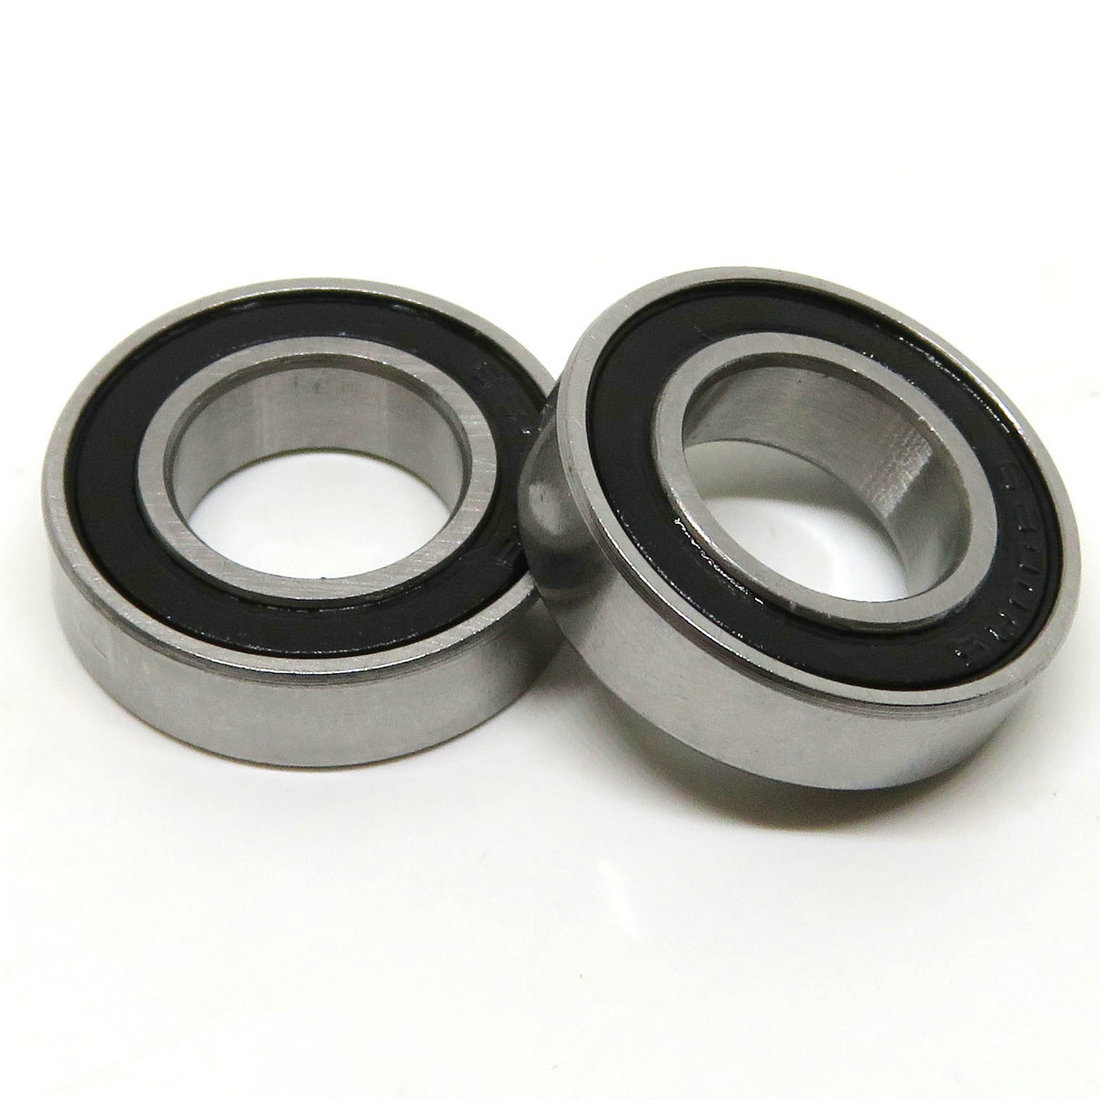 Bearing 2RS 6800 10x19x5mm 6802 6801 6803 6804 6805 6807 6808 6810 6811 6809 6810 ZZ Deep Groove Ball Bearing for Packing Machine